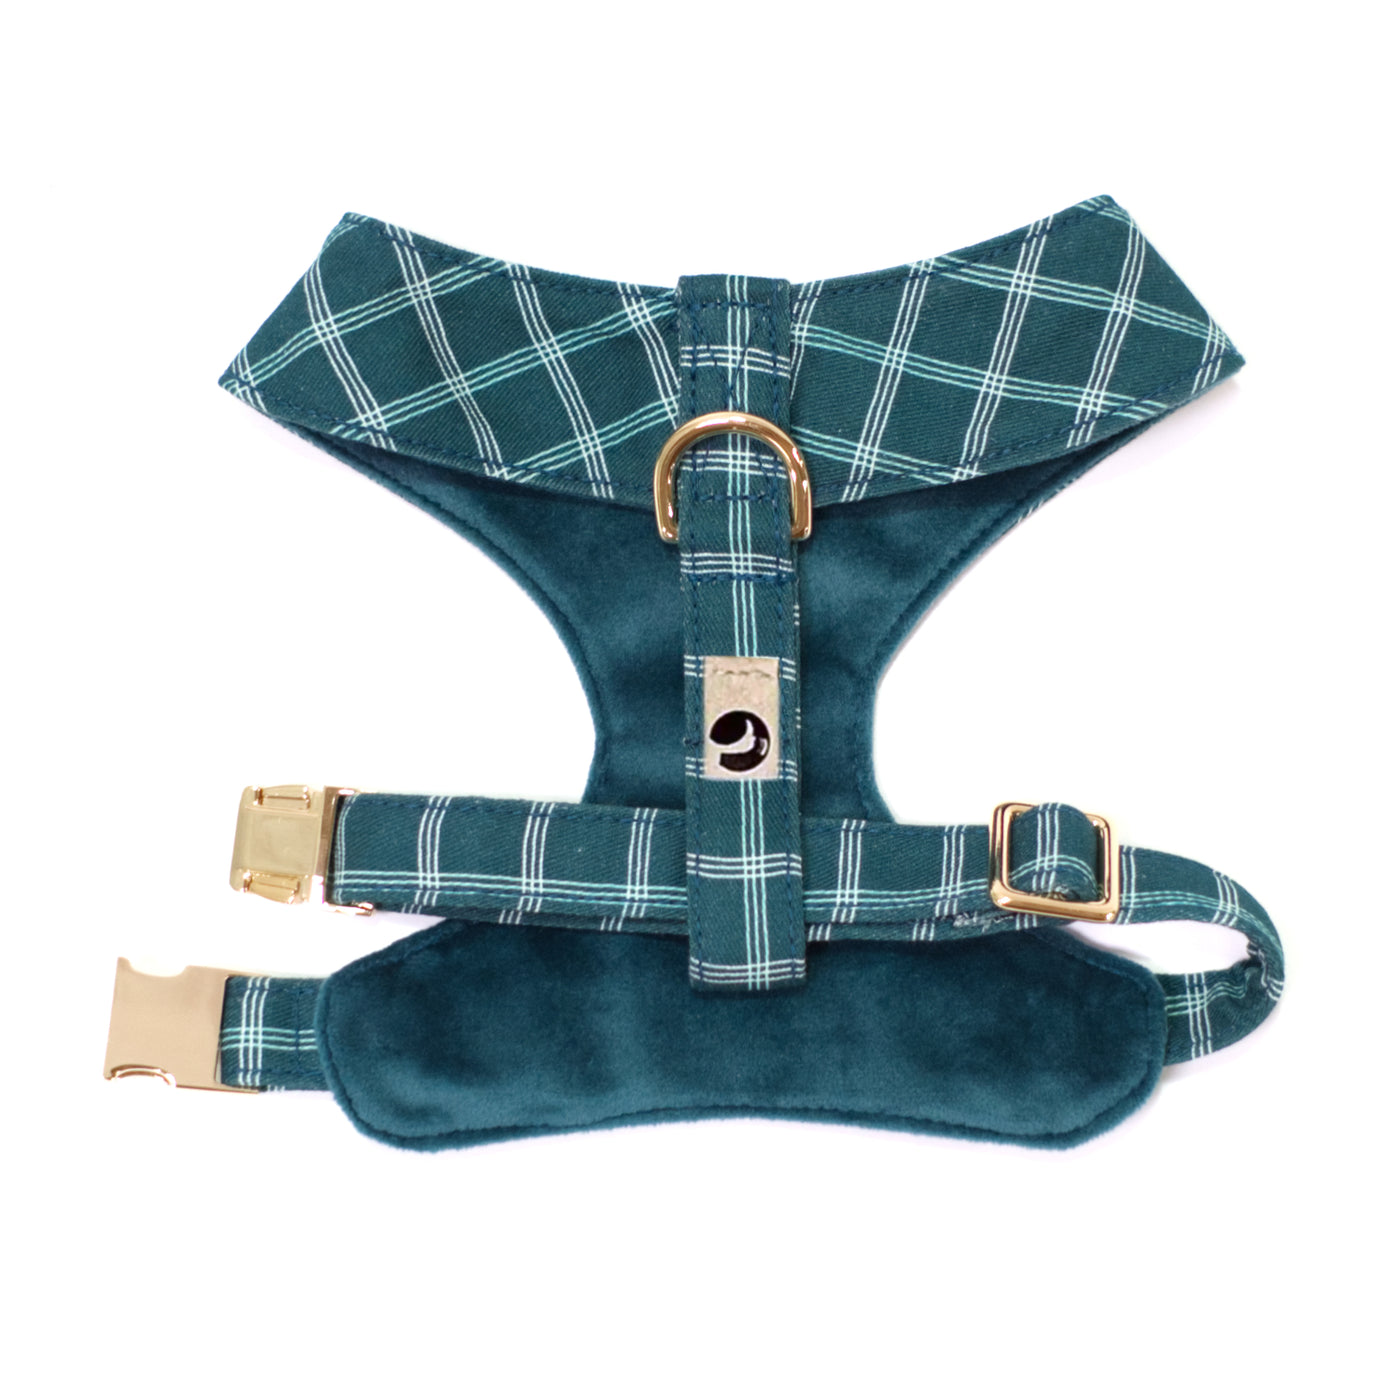 Dark teal reversible dog harness in windowpane plaid shown from top/back, size XS